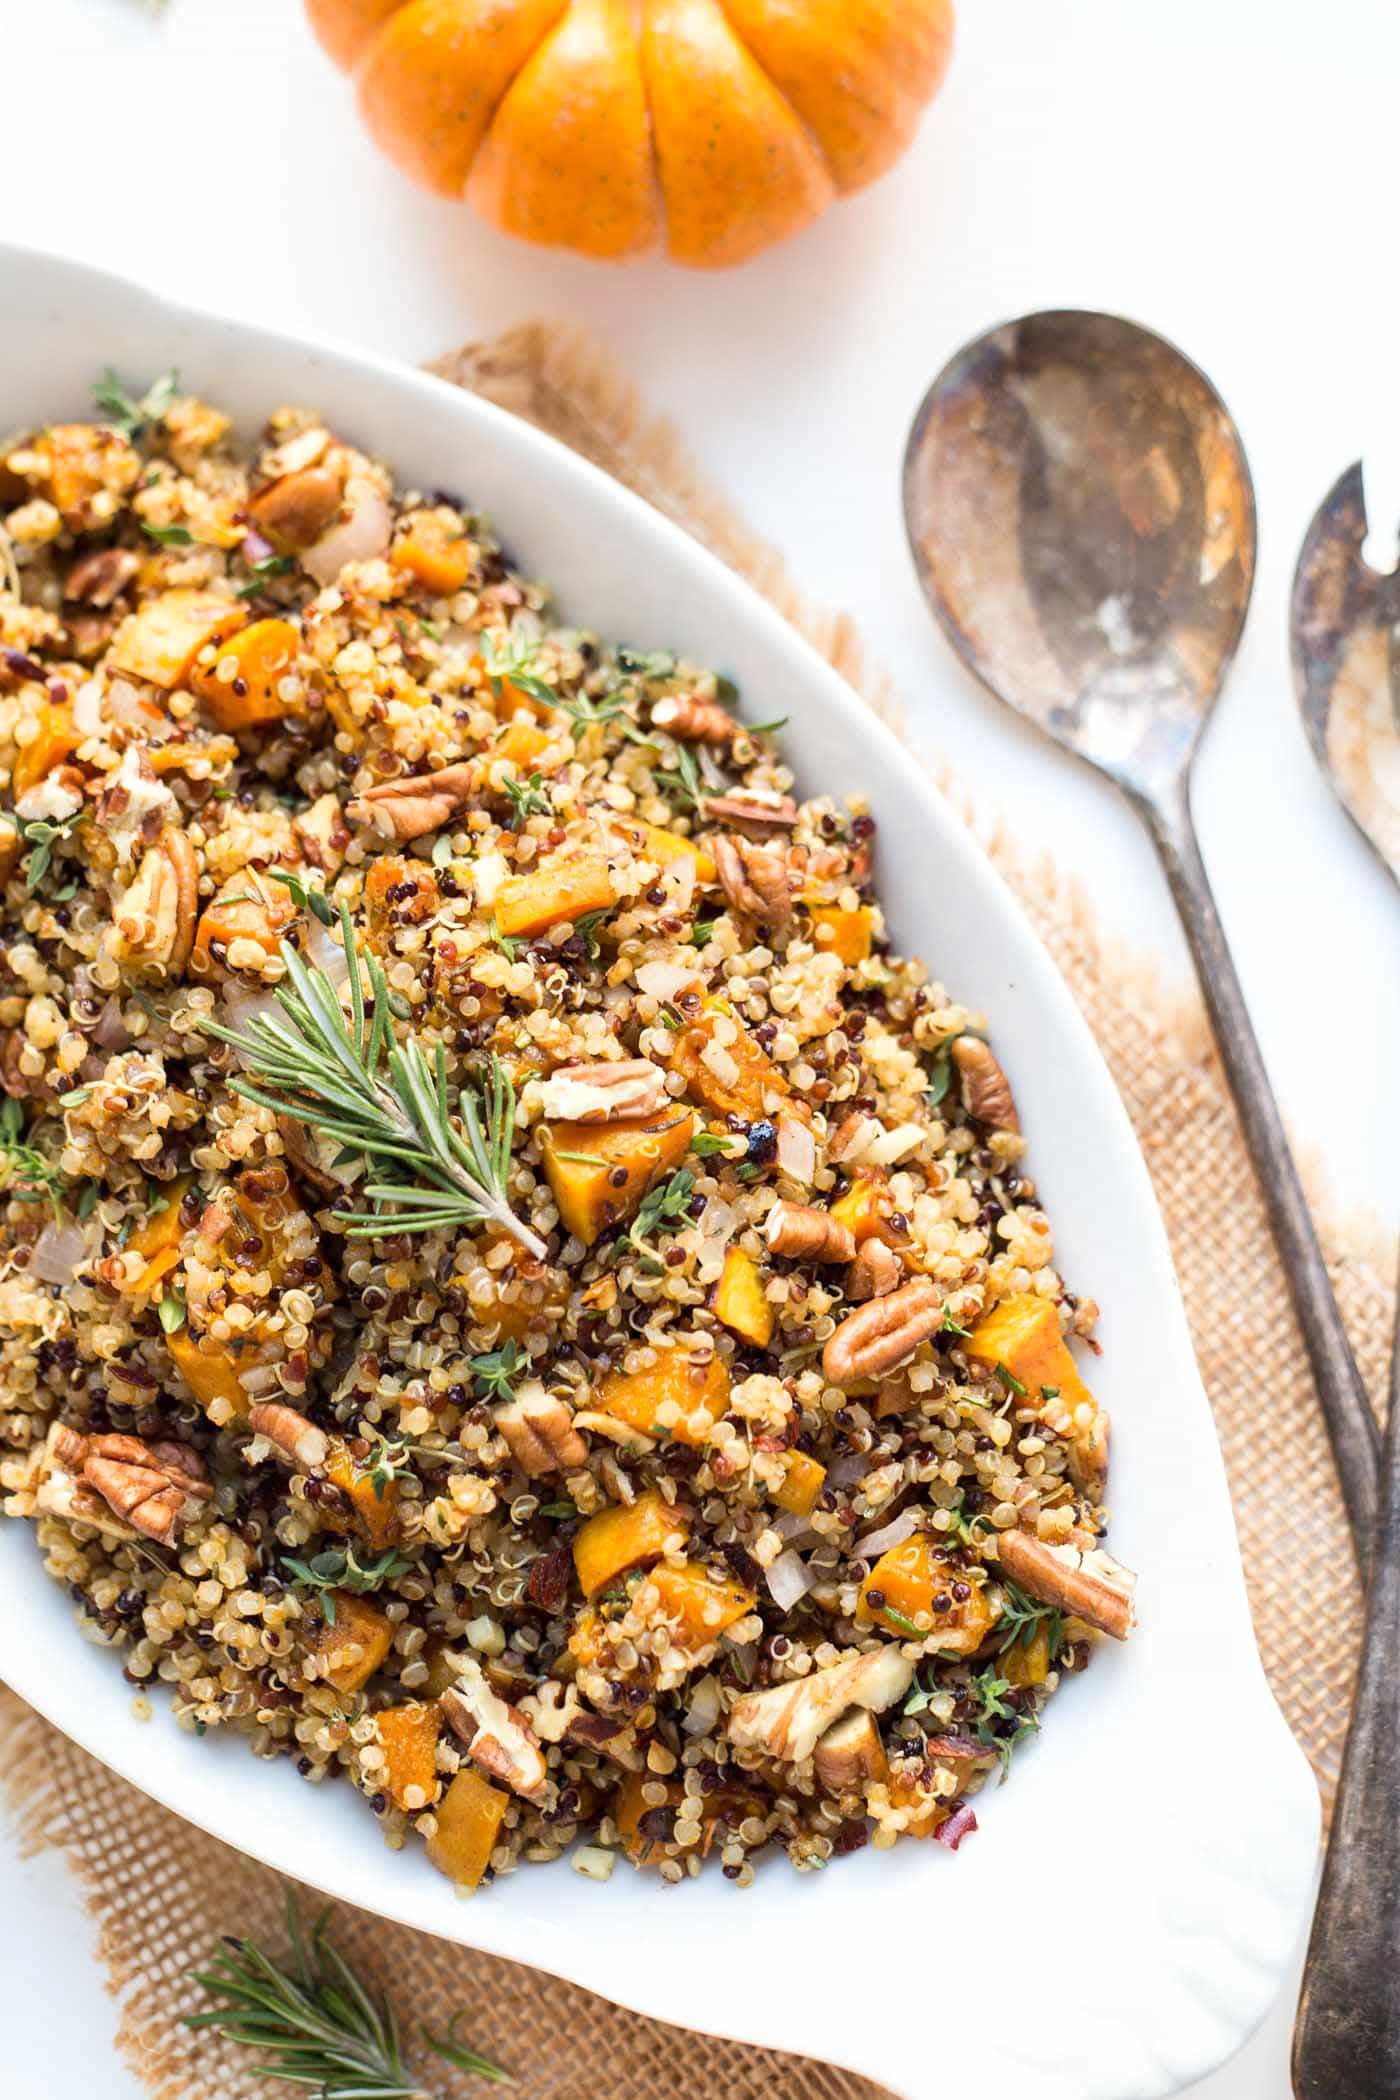 Healthy Stuffing Recipes For Thanksgiving
 Easy Quinoa Stuffing Recipe Simply Quinoa